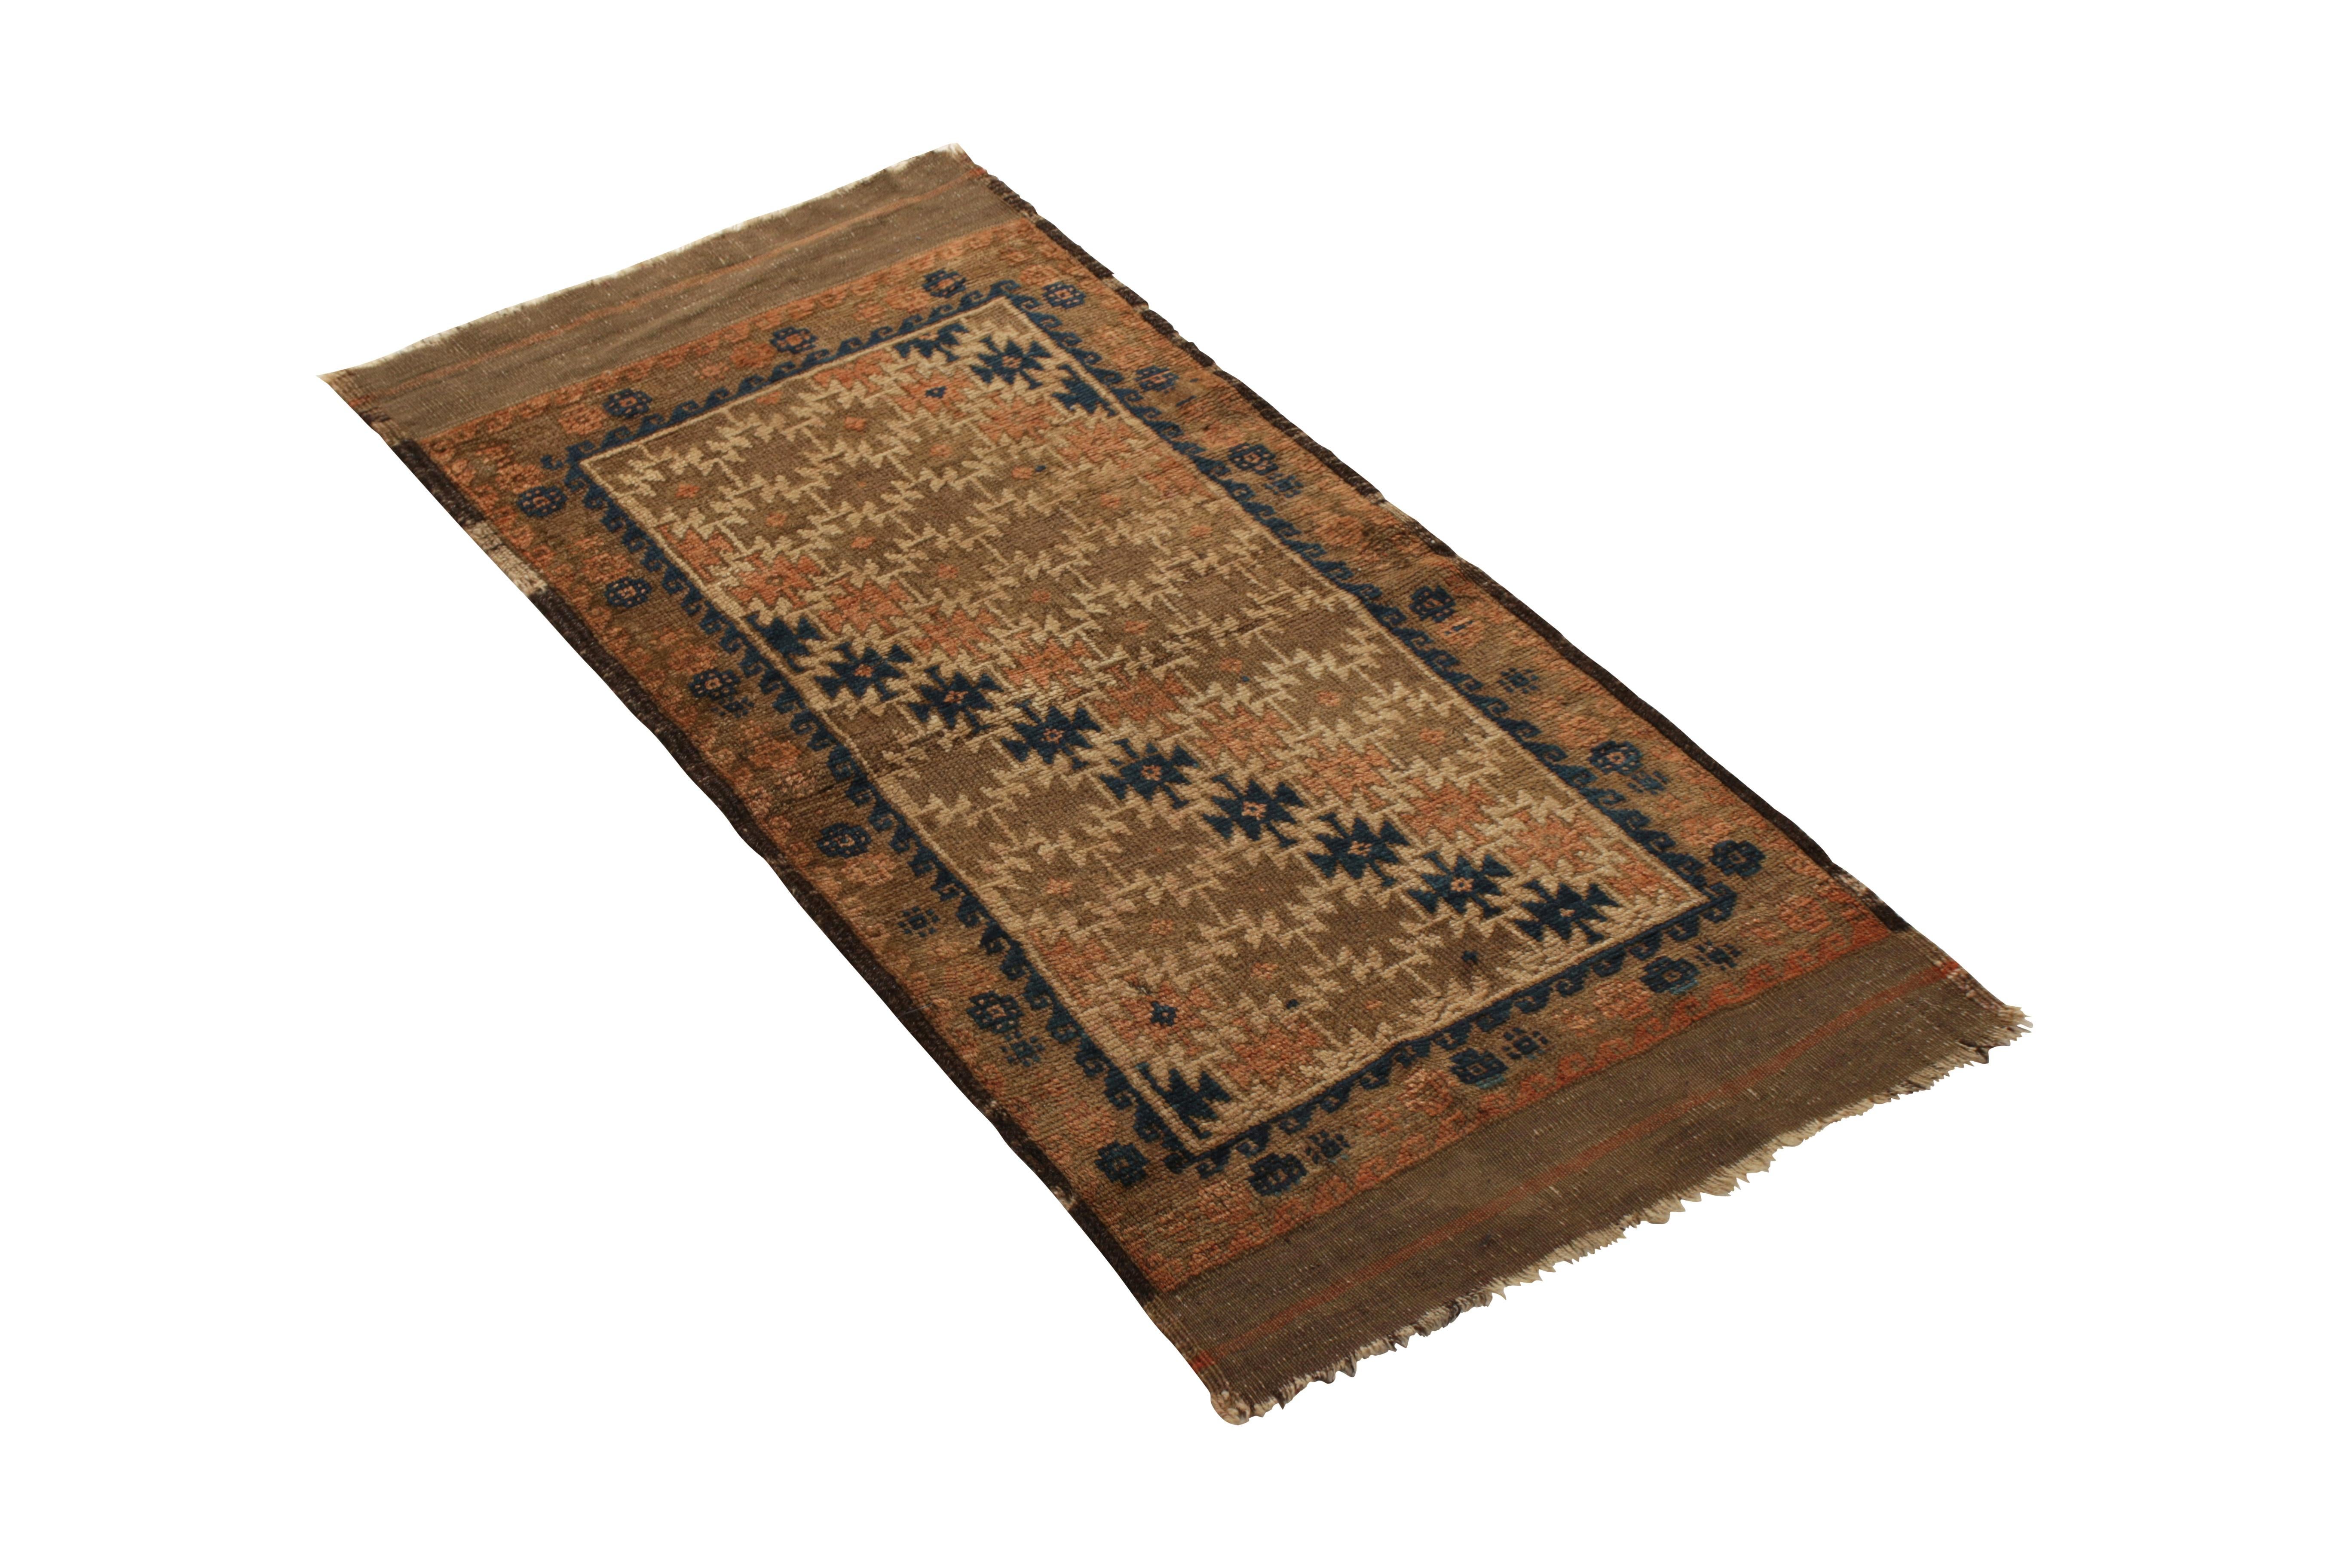 Hand knotted in wool originating circa 1890-1900, this 1 x 2 antique rug denotes a rare Baluch rug design in both an uncommon, versatile accent rug size and a rich play of beige-brown with navy blue and orange accents. Enjoying only mild wear